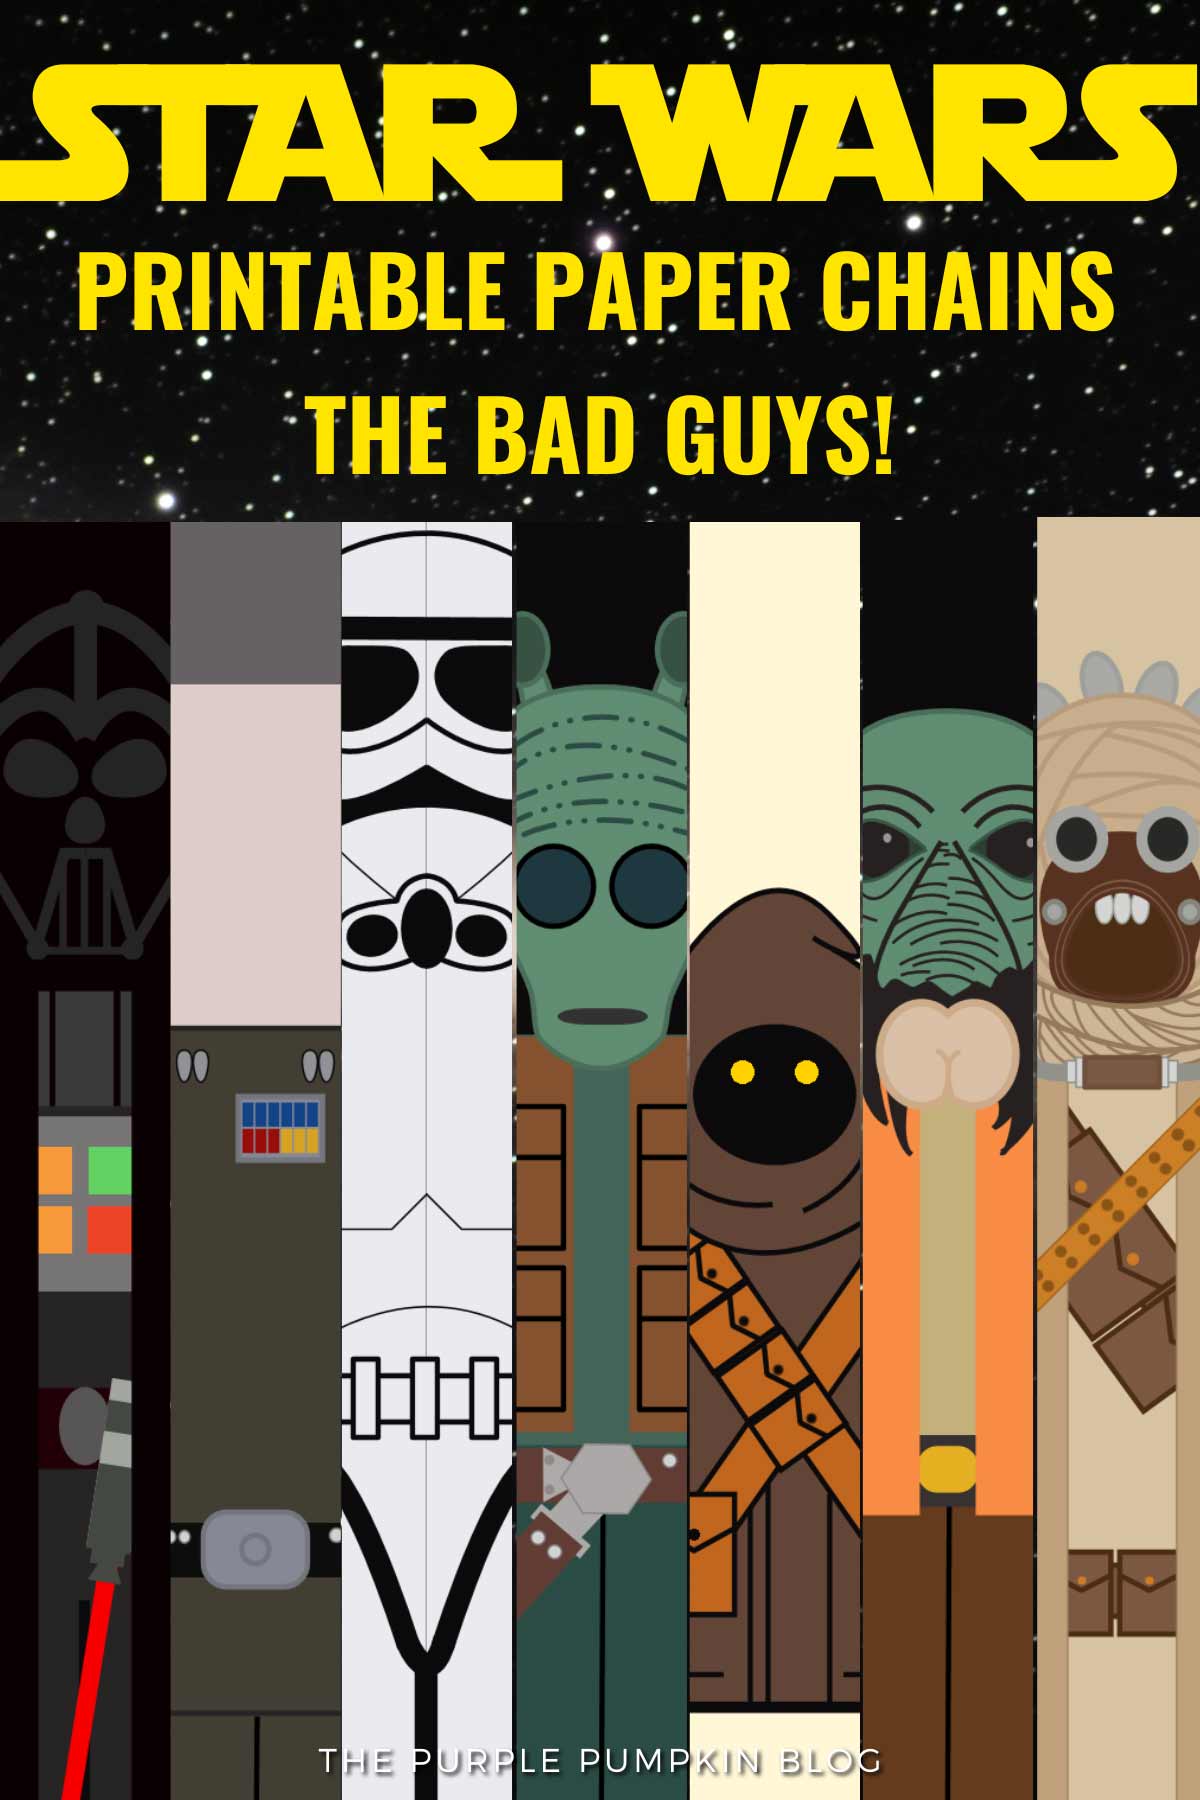 Star-Wars-Printable-Paper-Chains-The-Bad-Guys